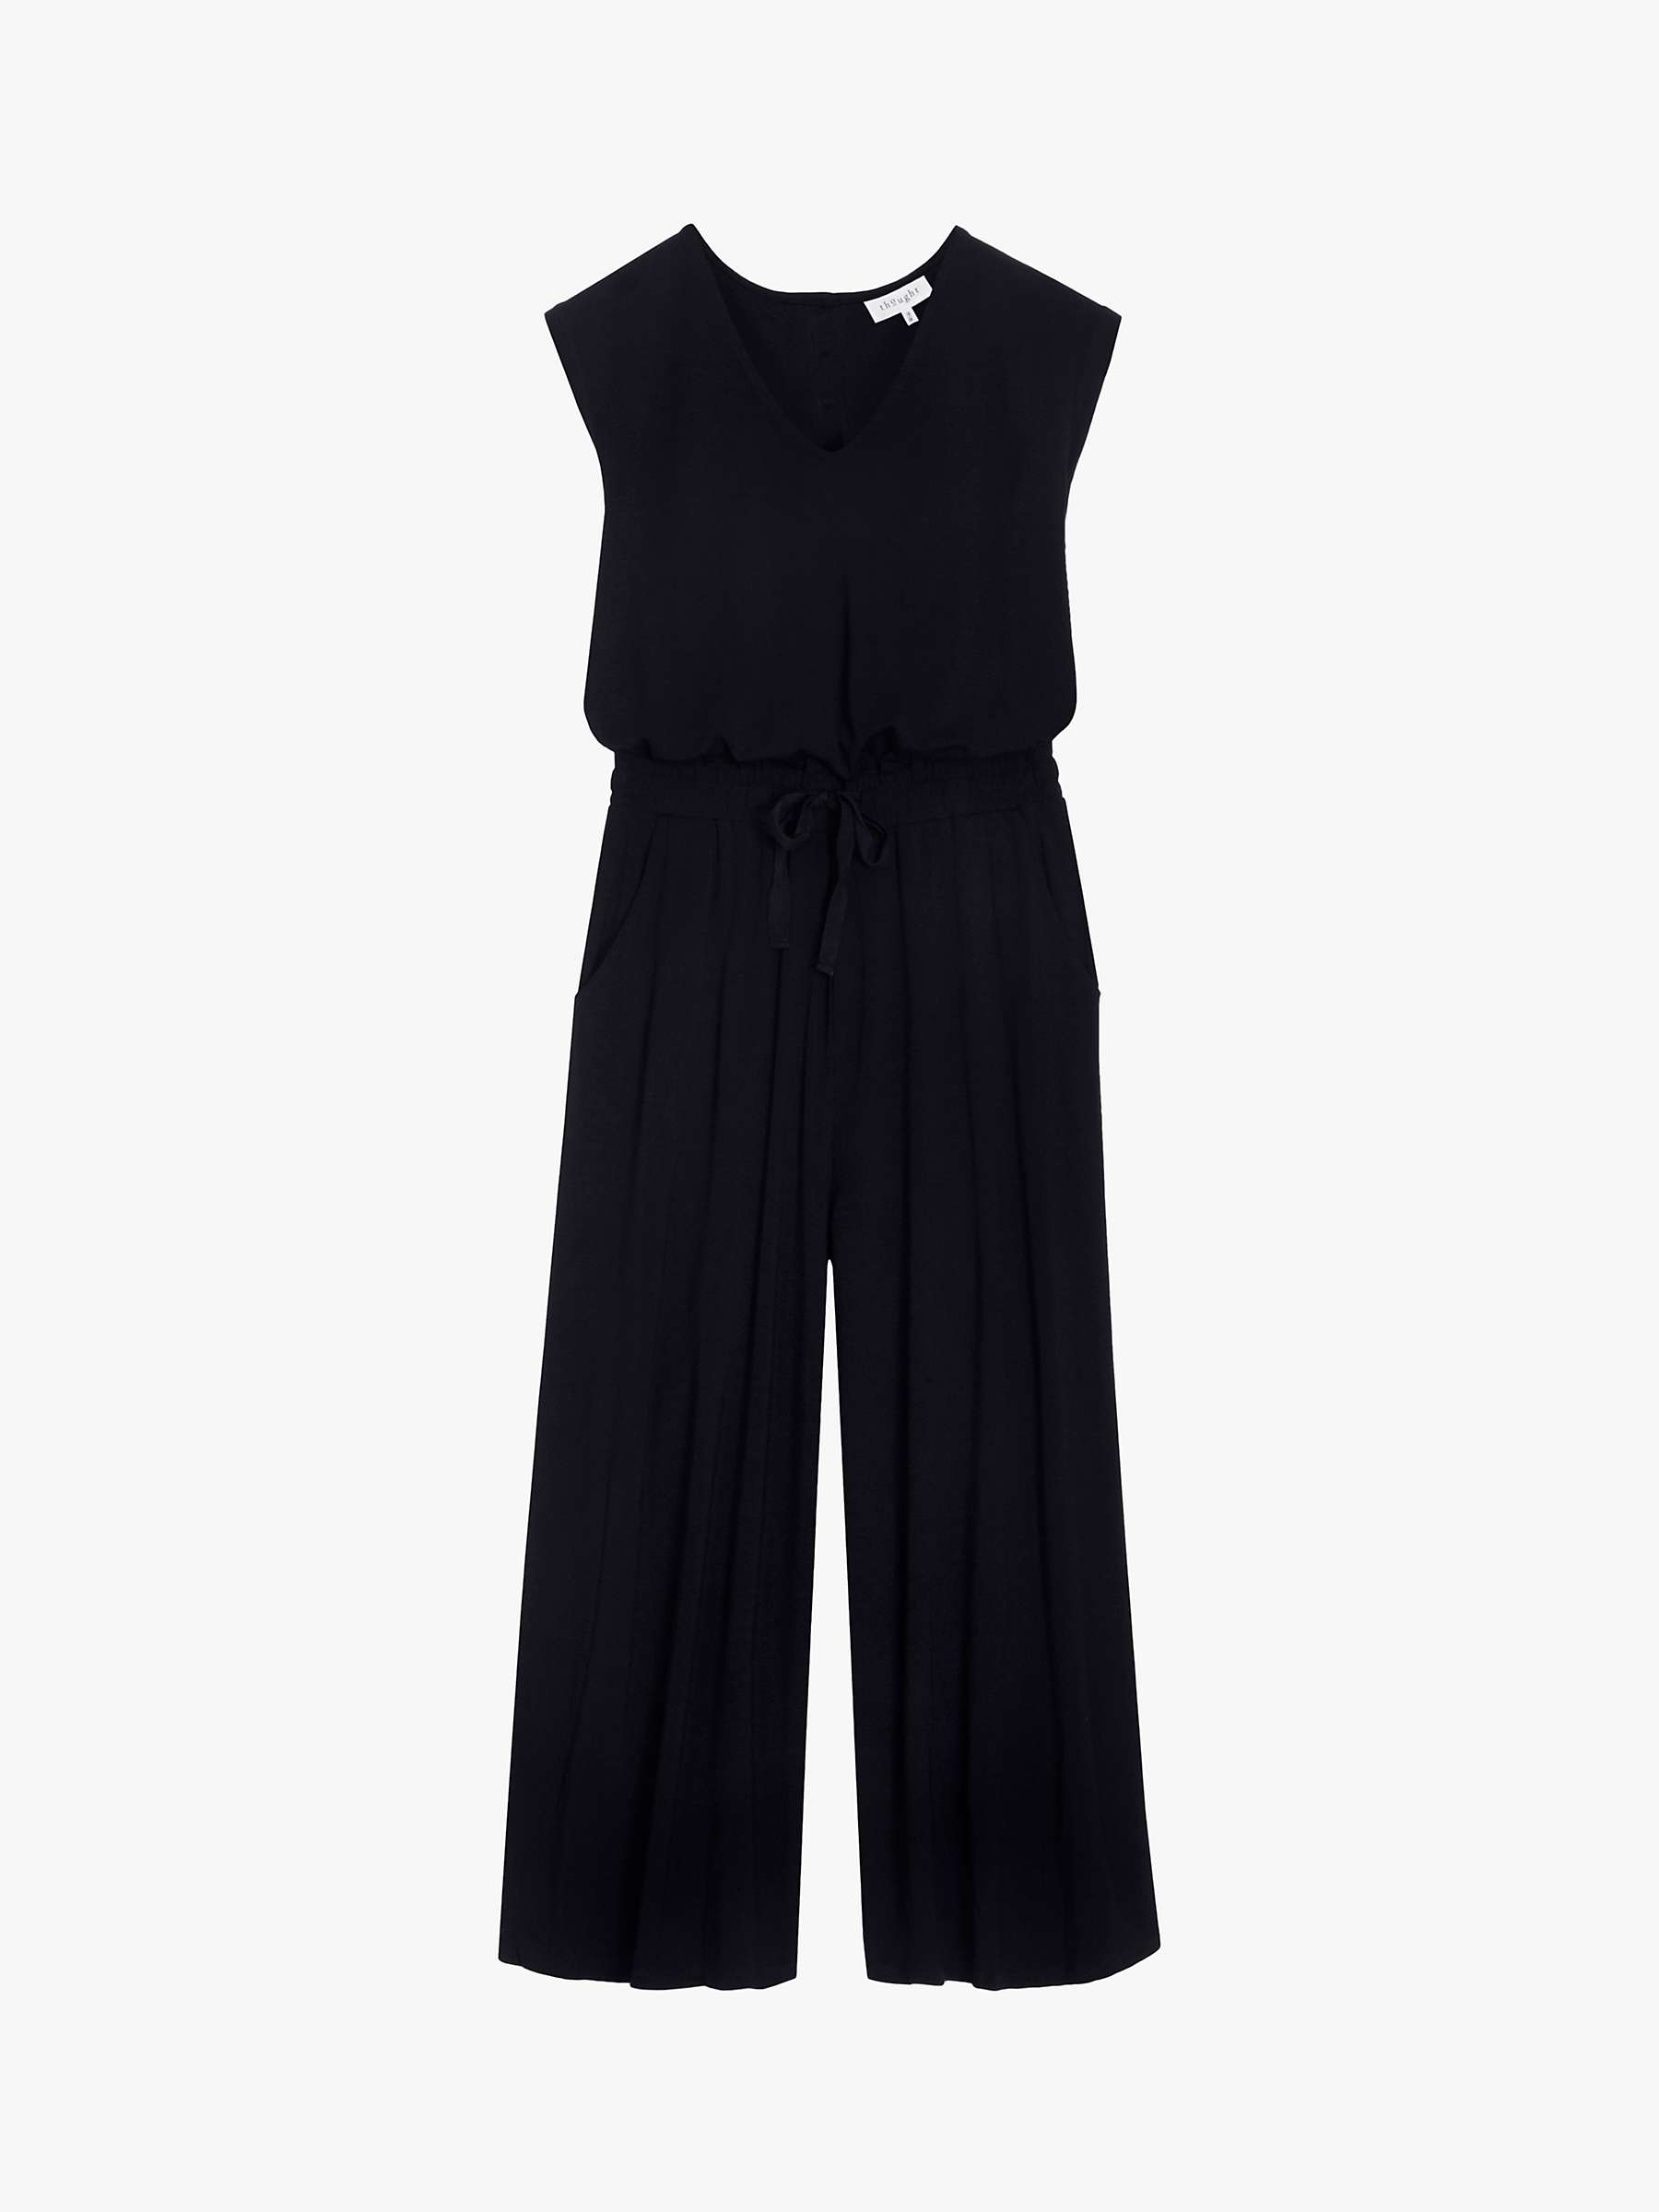 Buy Thought Colonel Bamboo Jersey V-Neck Dashka Jumpsuit, Navy Online at johnlewis.com